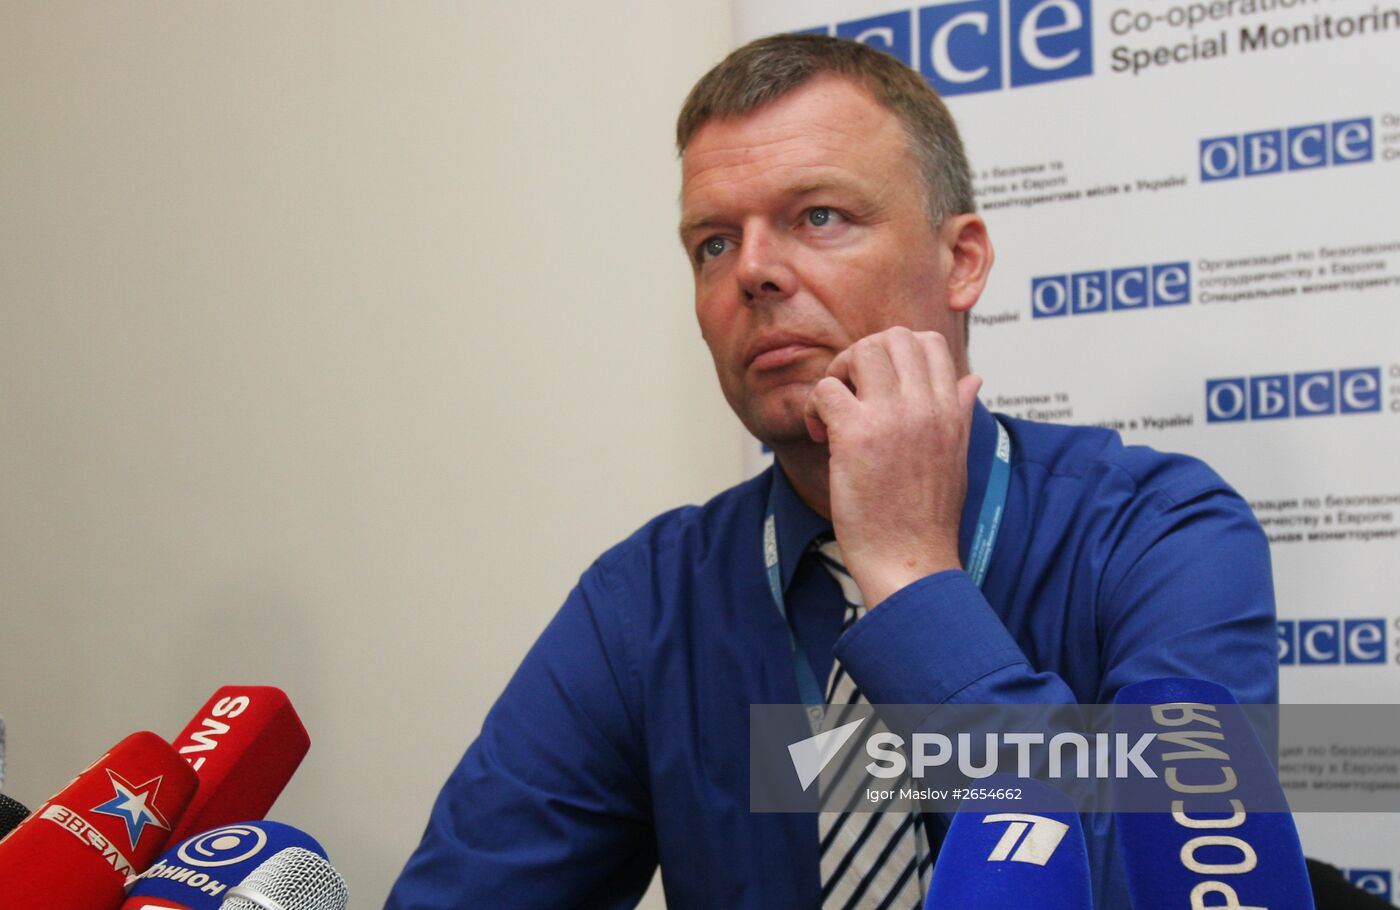 Deputy Chief Monitor of OSCE Special Monitoring Mission to Ukraine Alexander Hug speaks with journalists